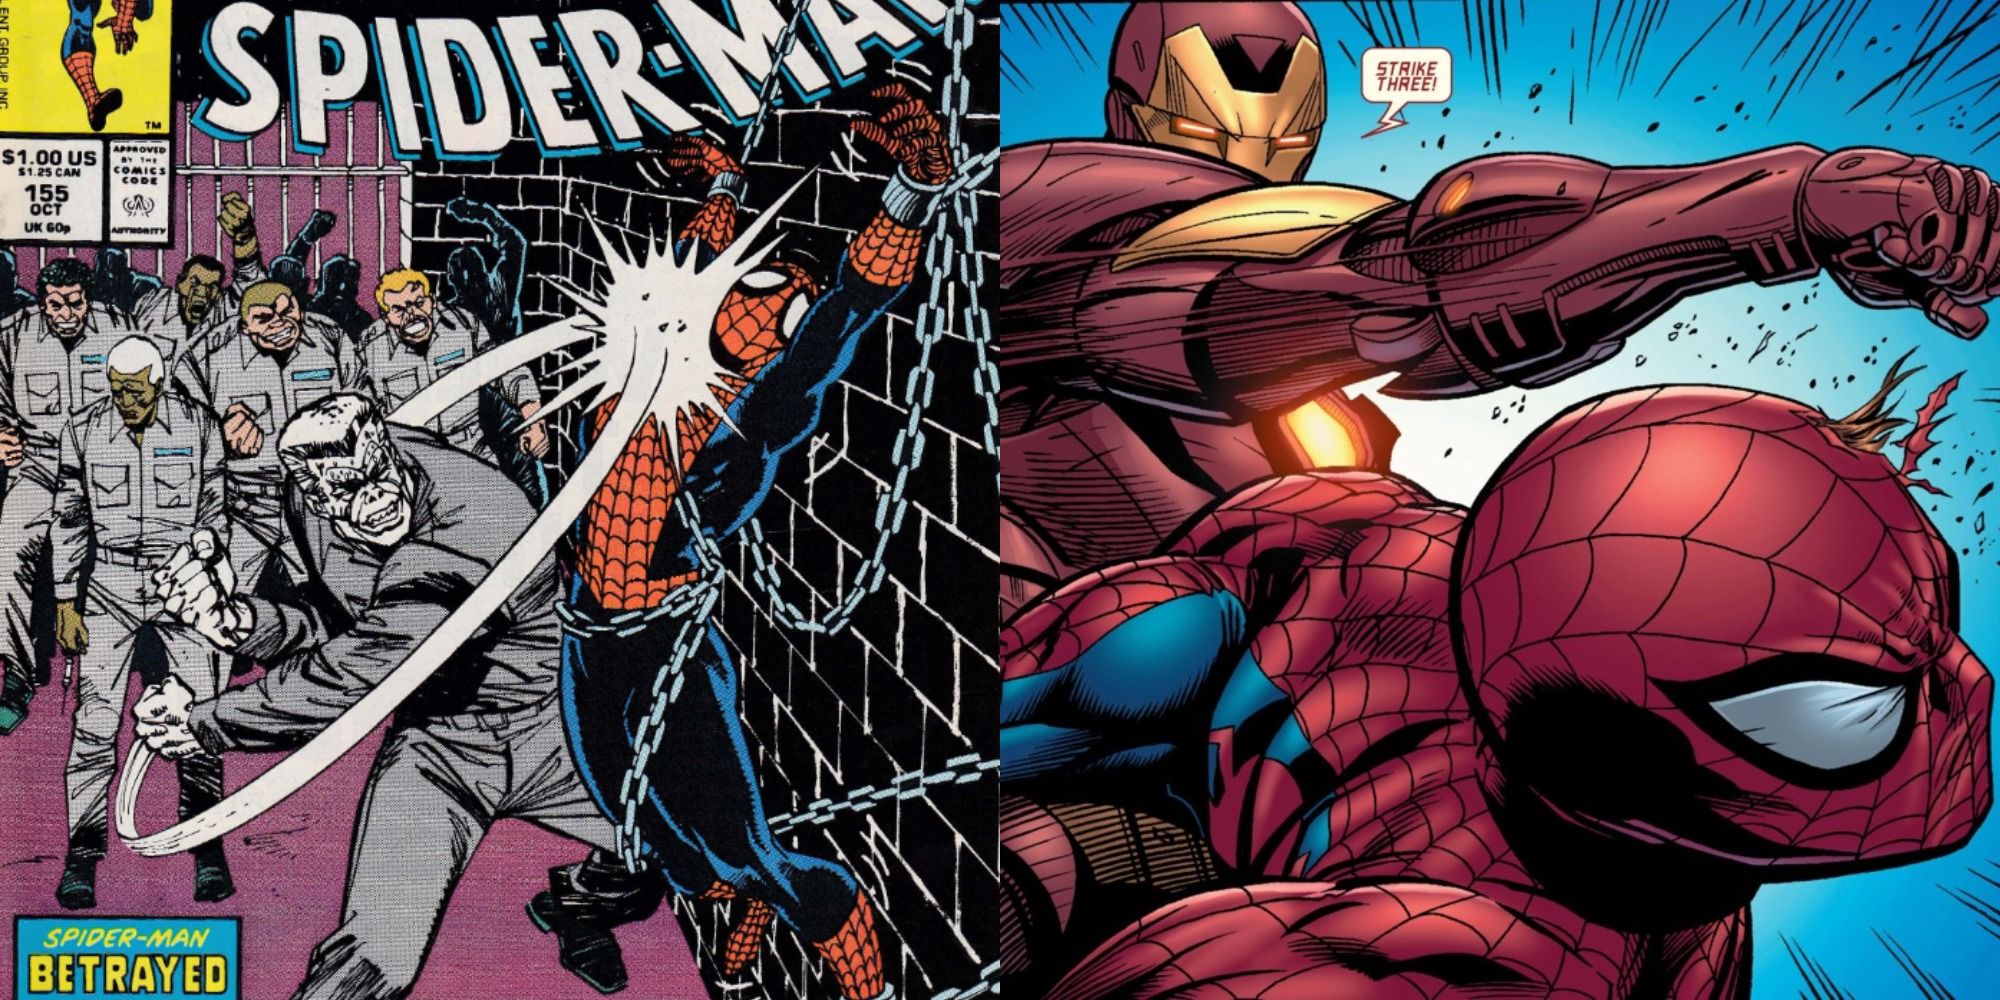 Split image showing Tombstone and Iron Man punching Spider-Man